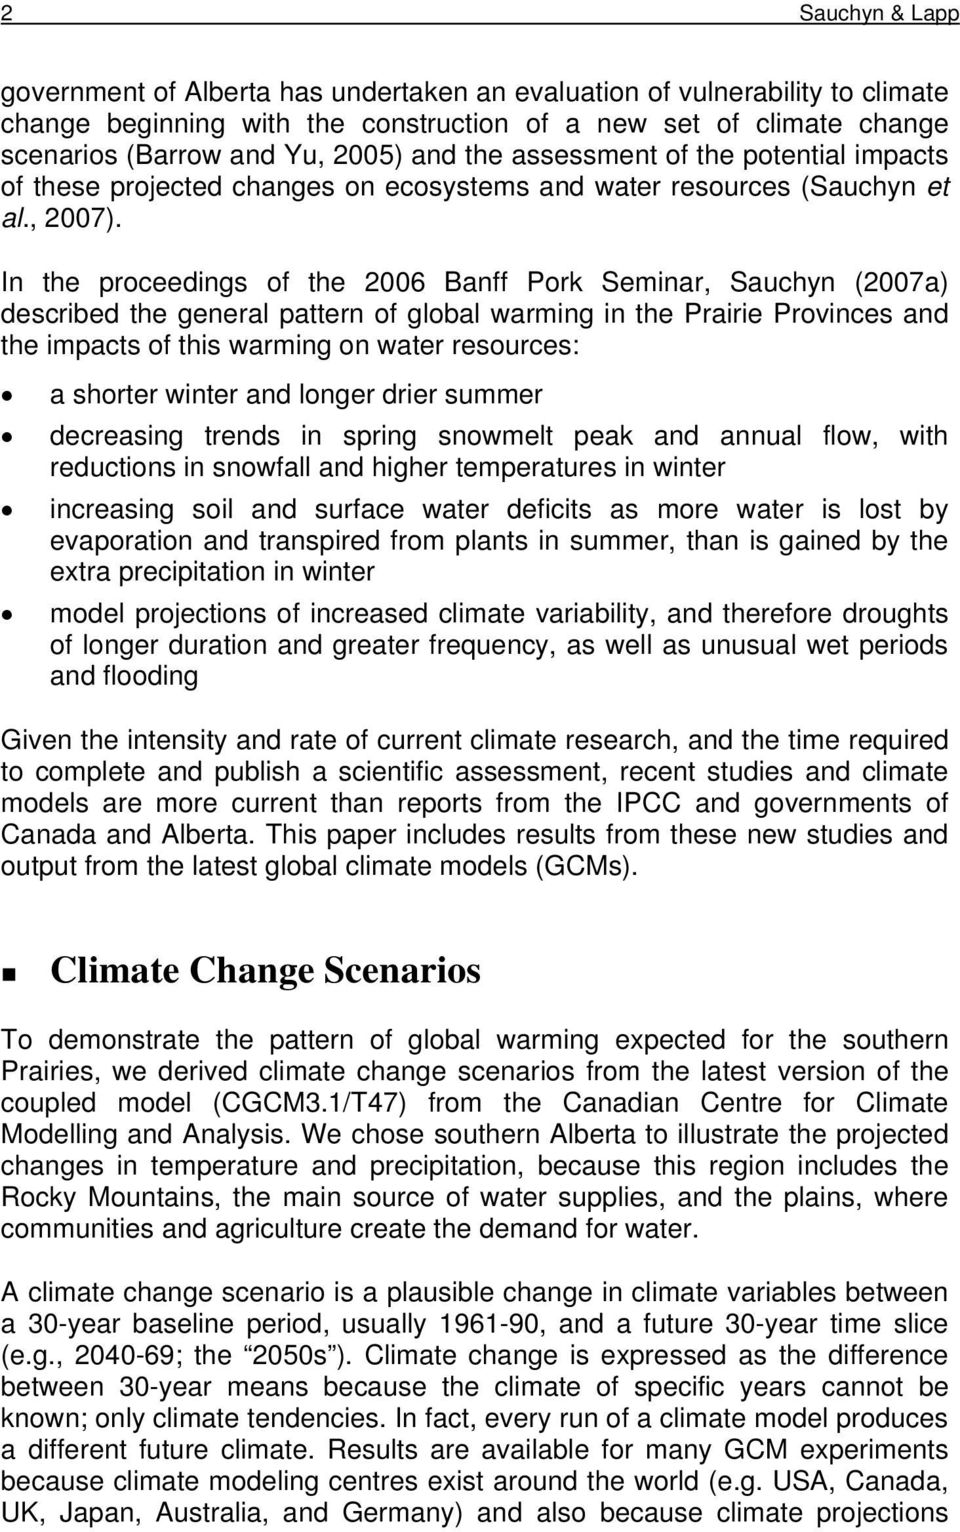 In the proceedings of the 2006 Banff Pork Seminar, Sauchyn (2007a) described the general pattern of global warming in the Prairie Provinces and the impacts of this warming on water resources: a